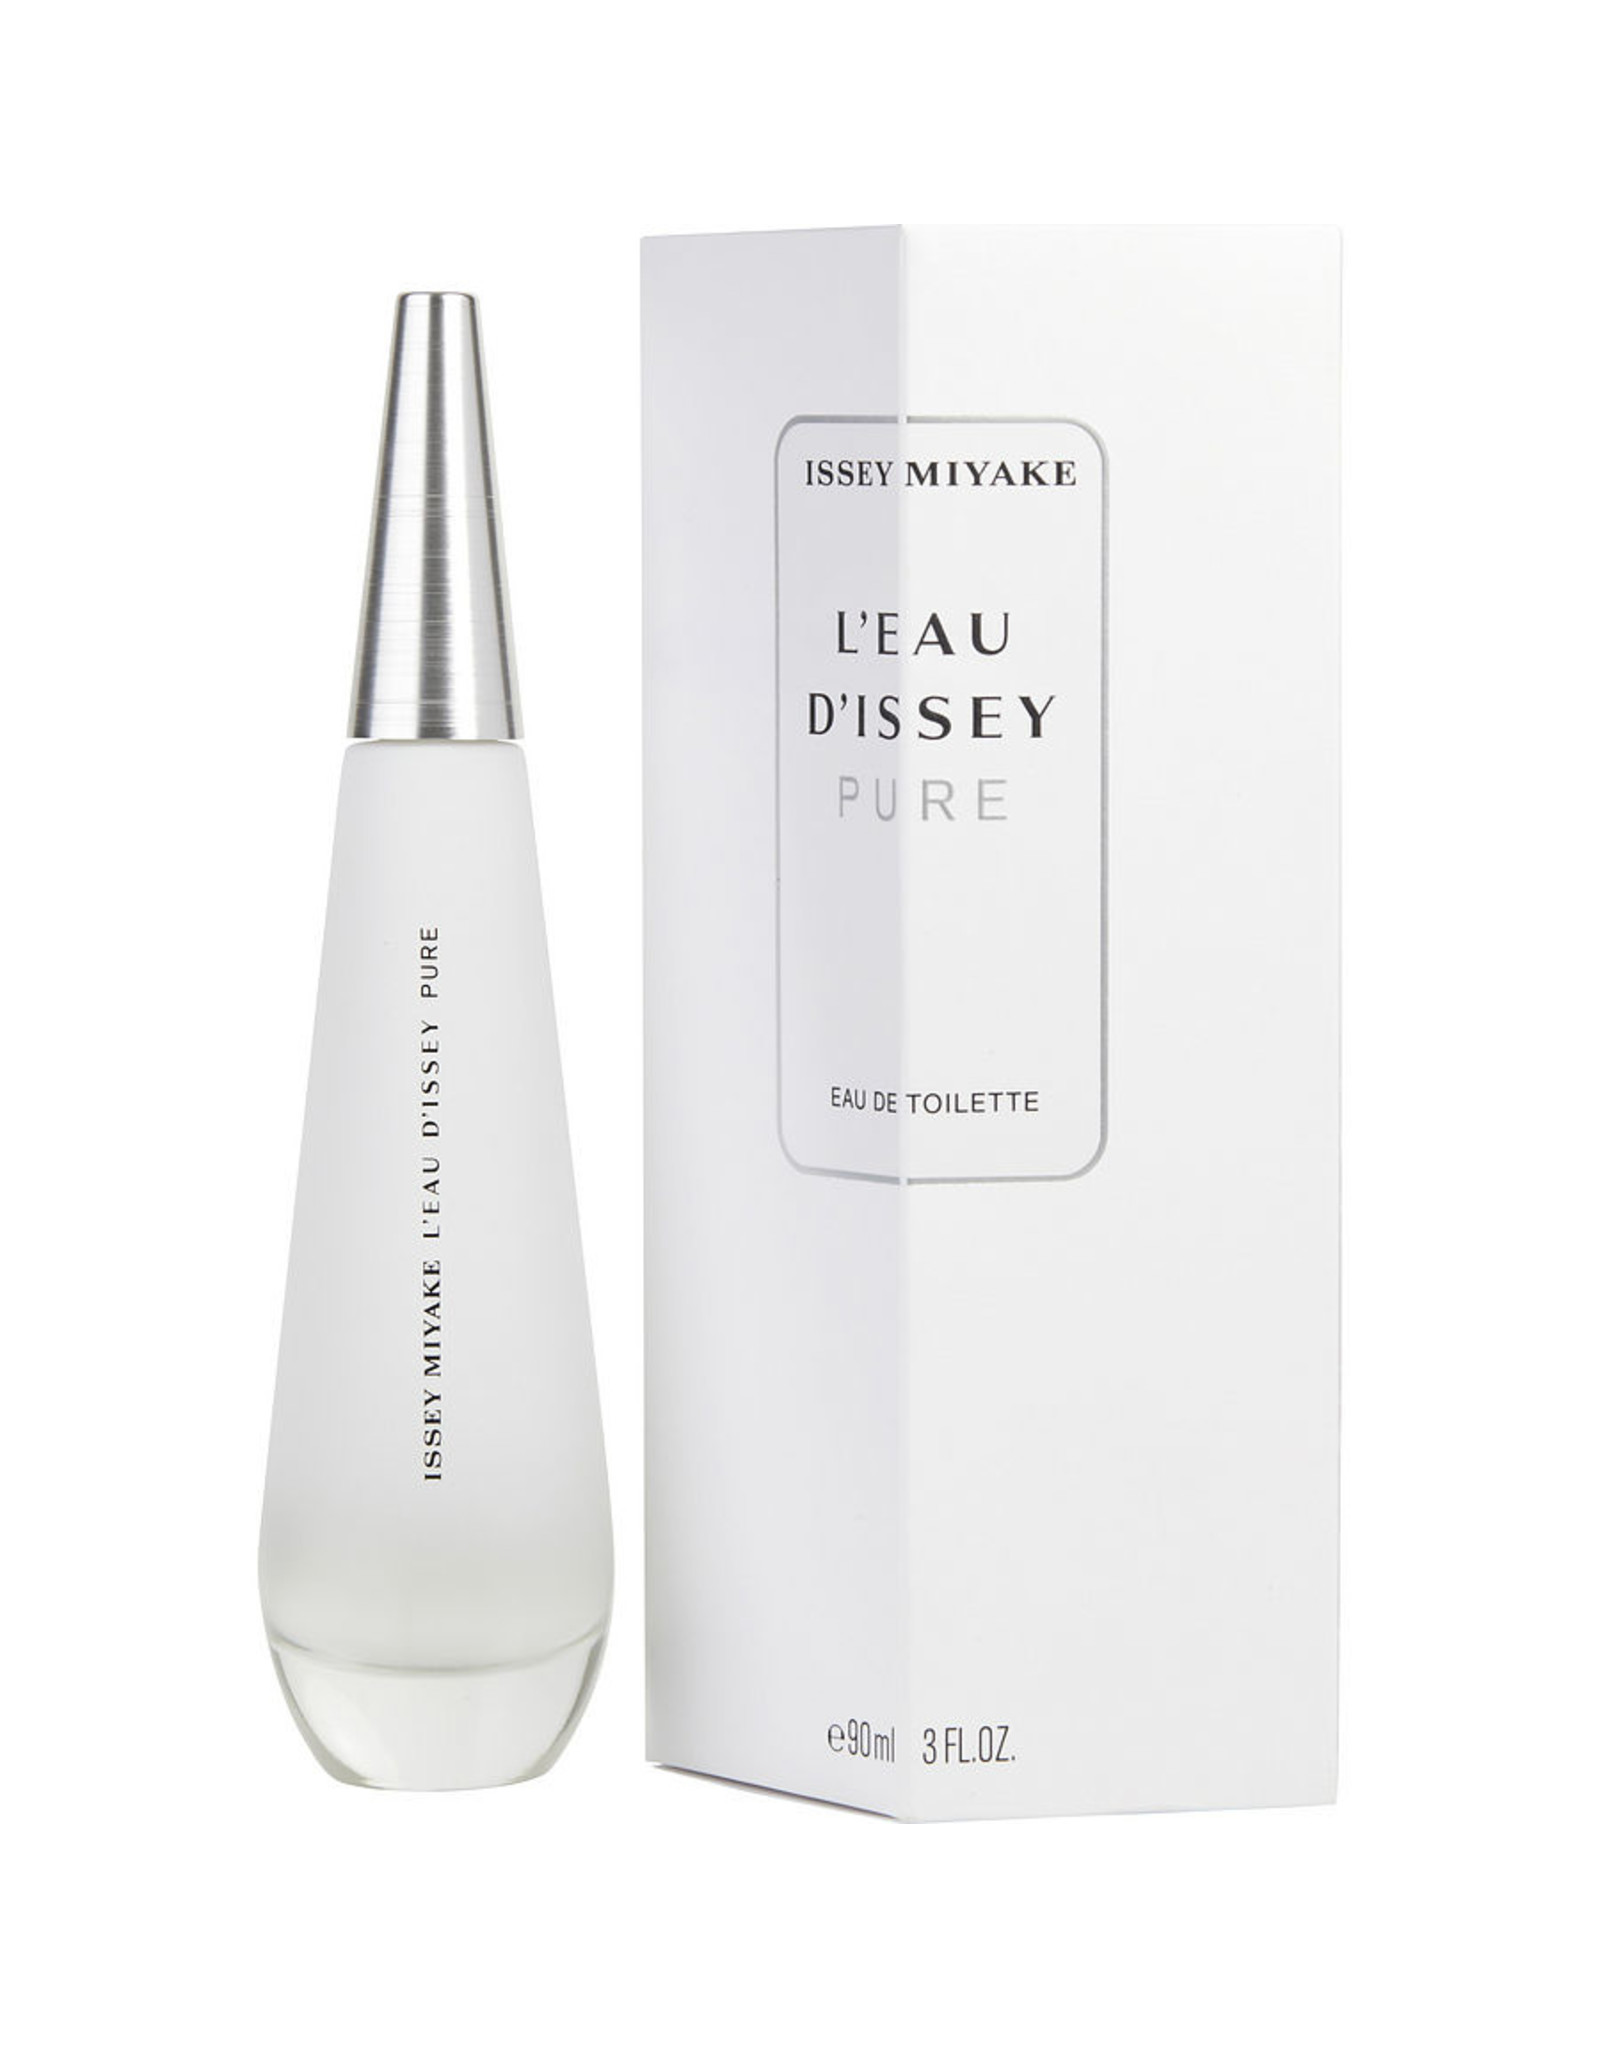 ISSEY MIYAKE ISSEY MIYAKE L'EAU D'ISSEY PURE FOR WOMAN